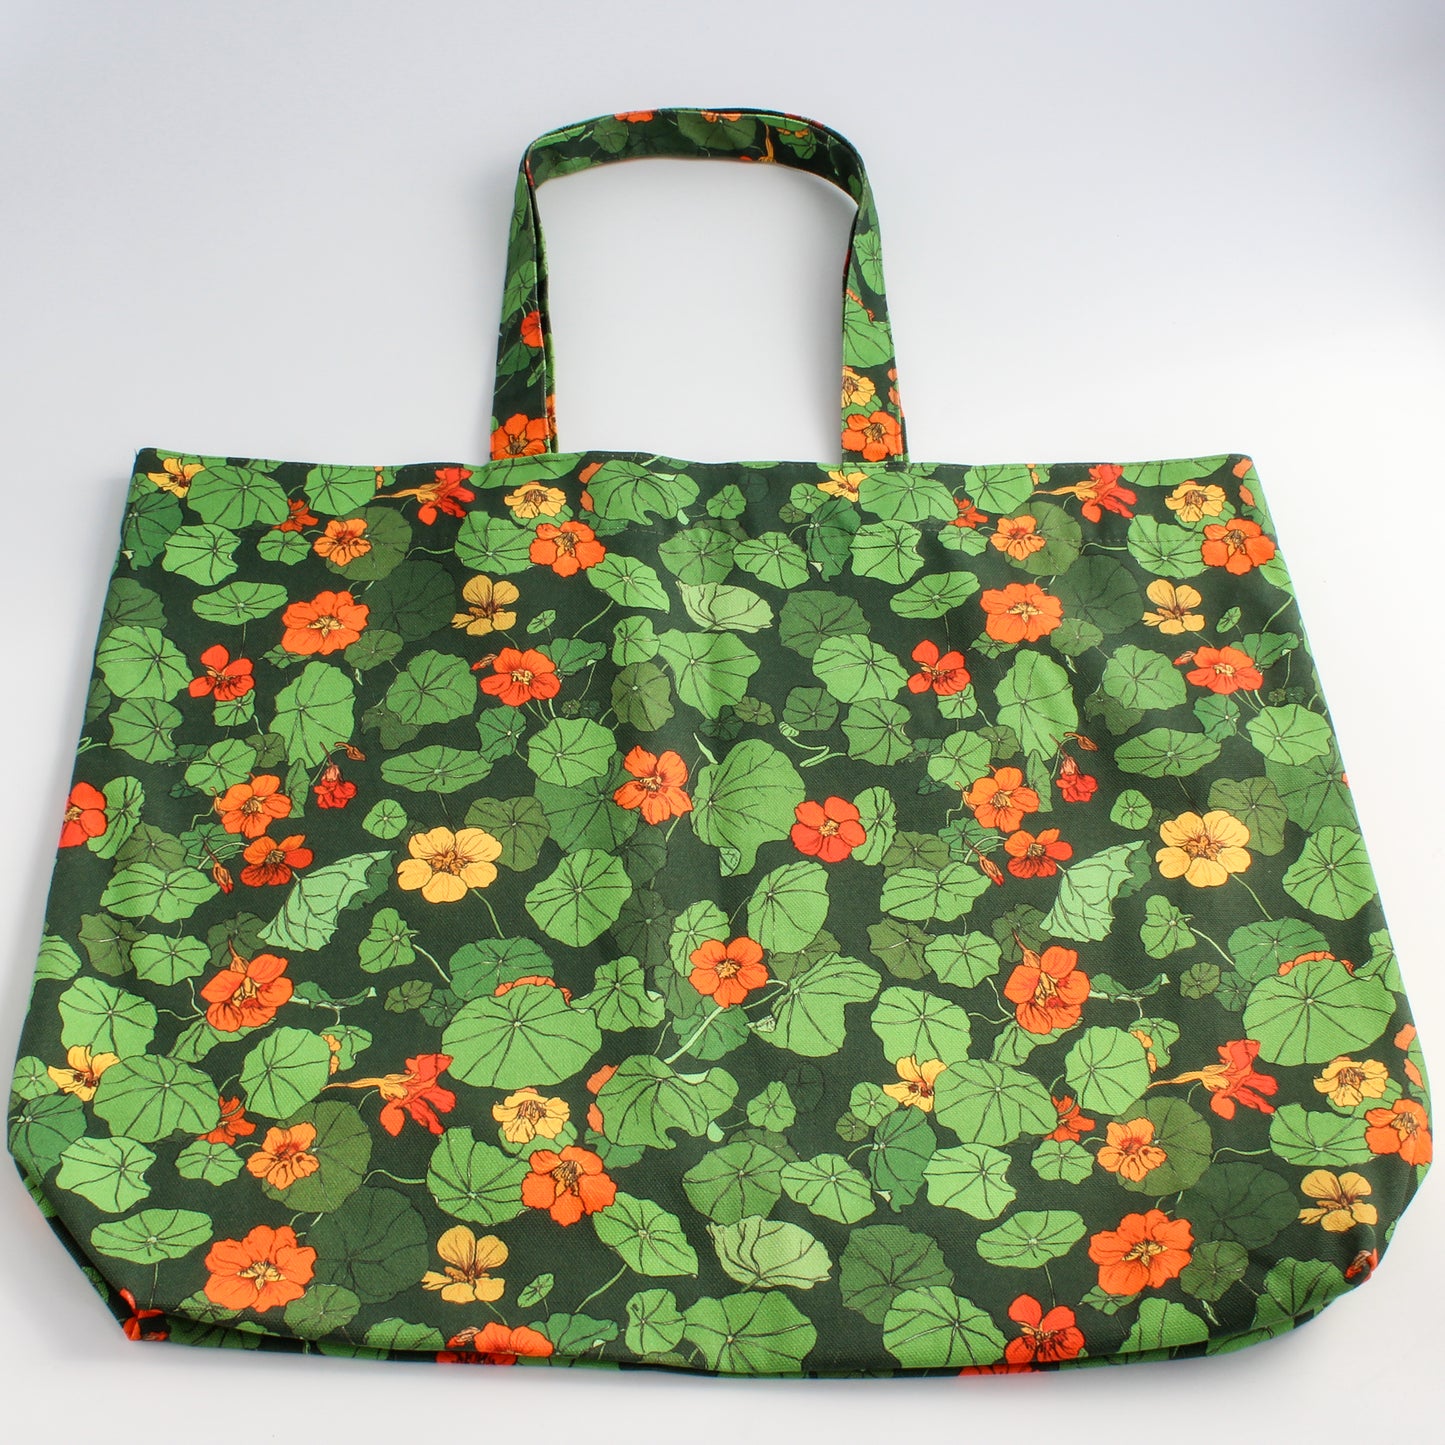 Planting with Nature: Cotton Tote Bag